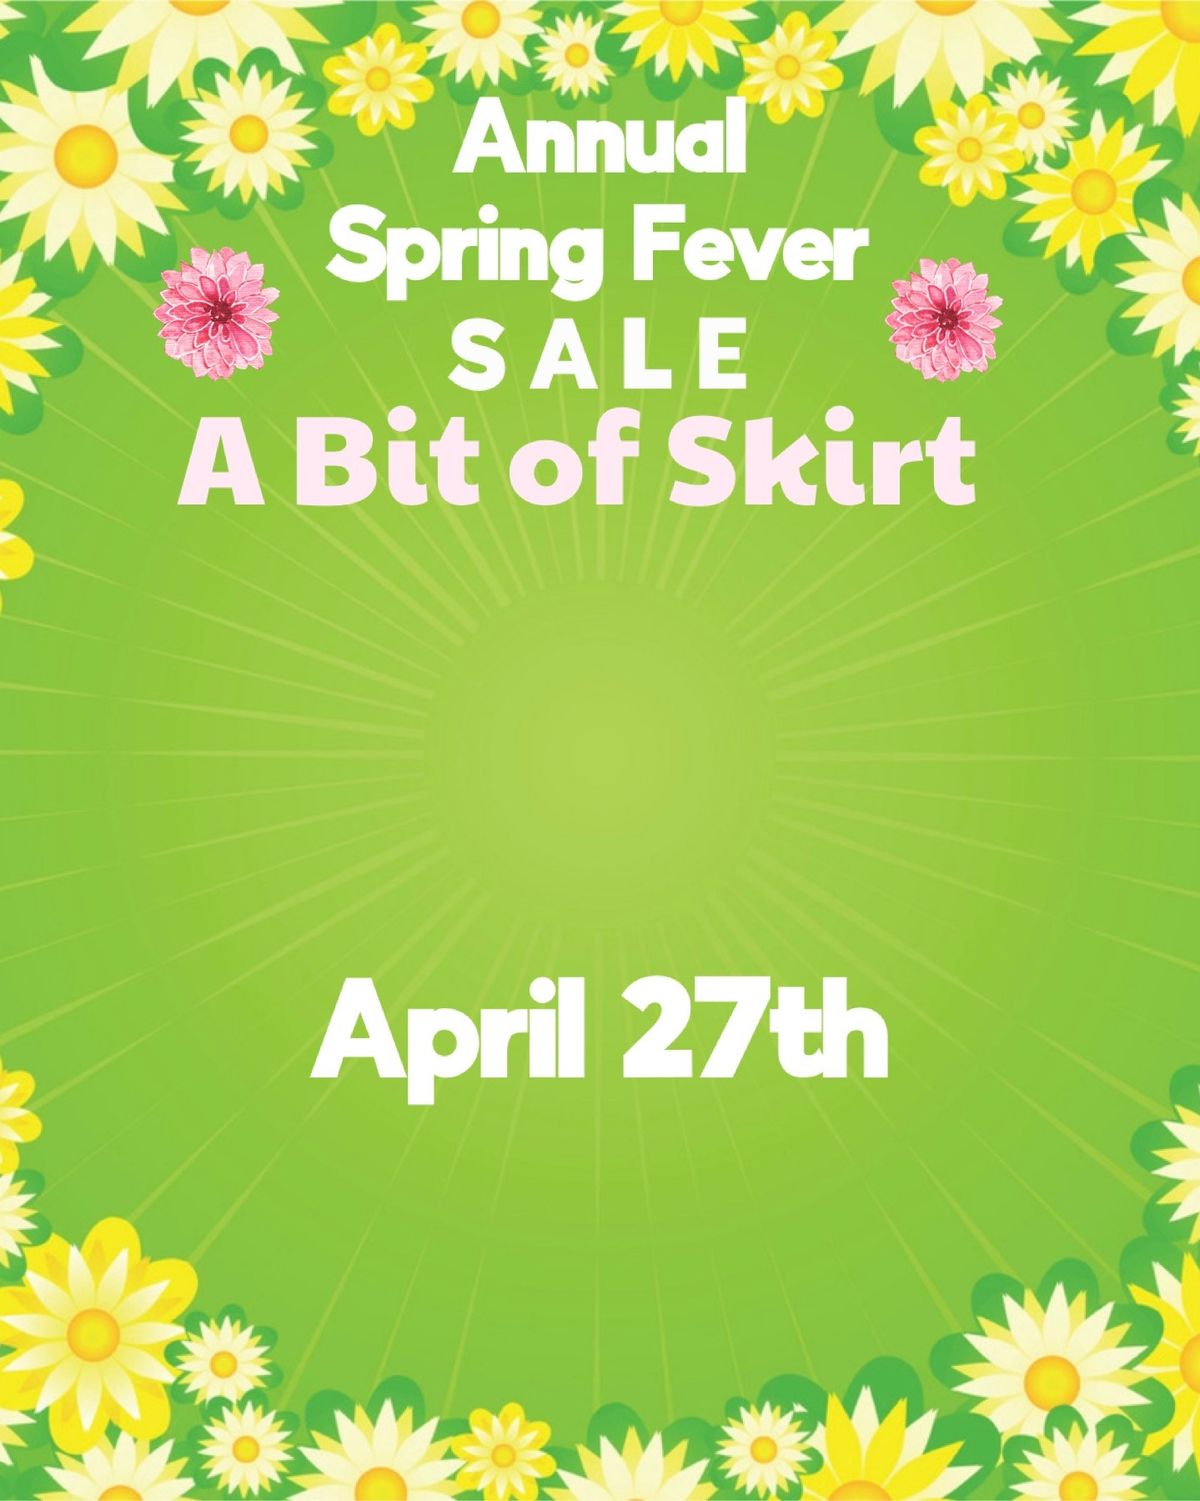 Annual Spring Fever Sale